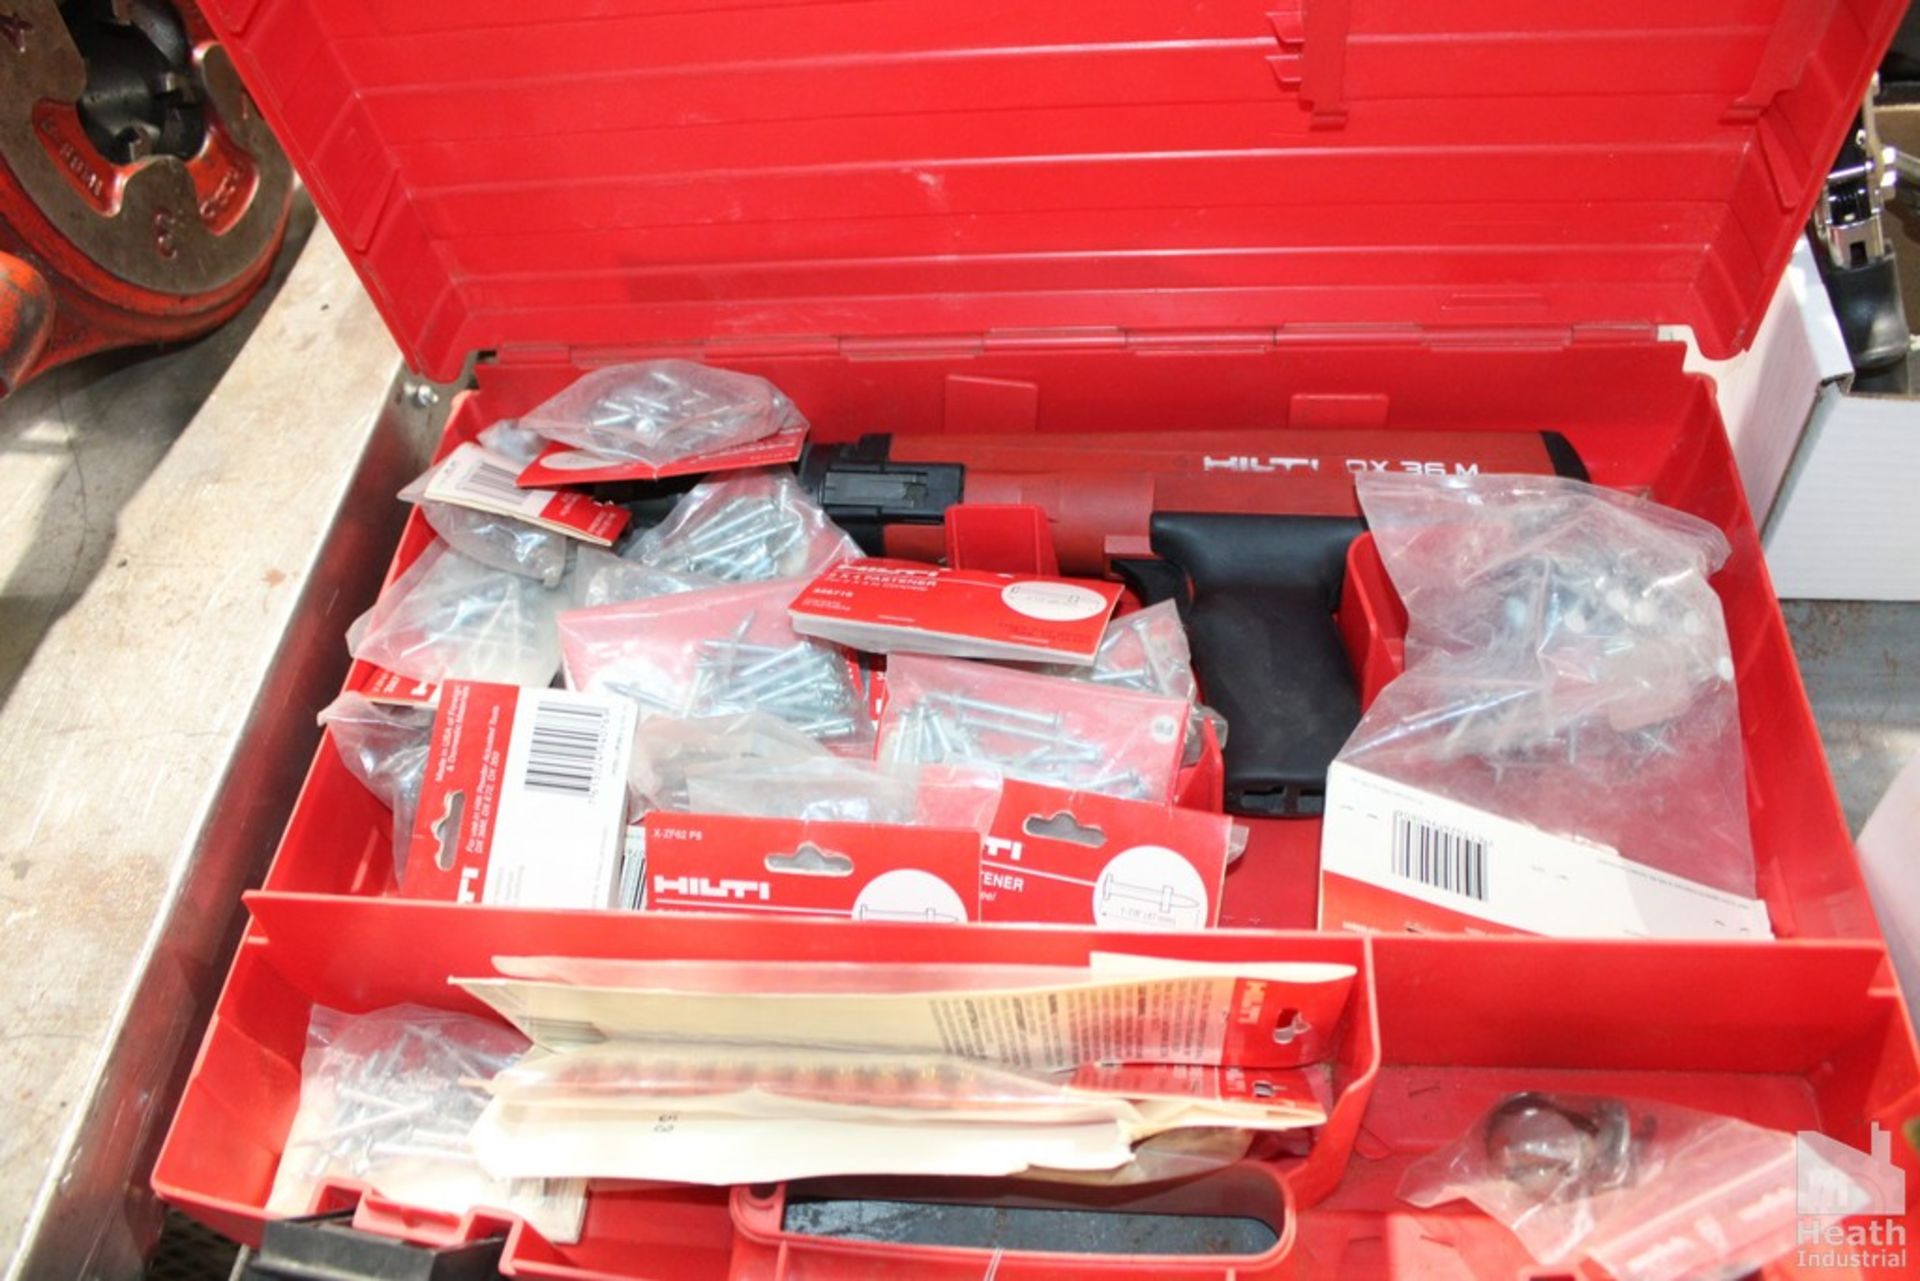 HILTI MODEL DX36M POWDER ACTUATED NAIL GUN WITH CASE - Image 2 of 2